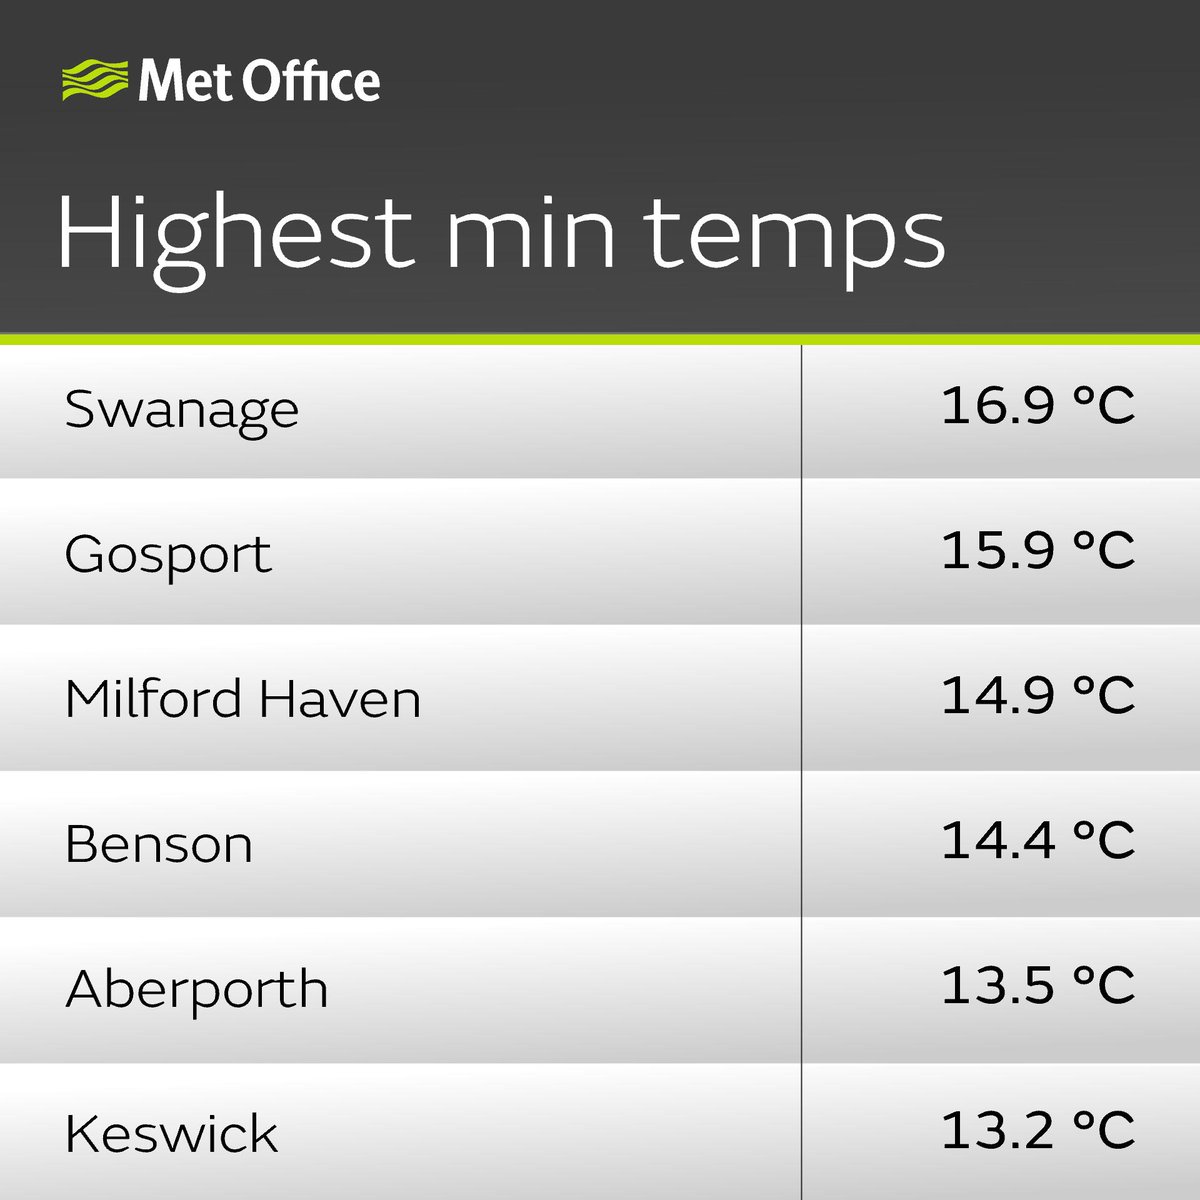 Last night was a mild one across the UK, with a number of locations remaining in double figures 🌡️ Here are some of the highest minimum temperatures recorded last night 👇